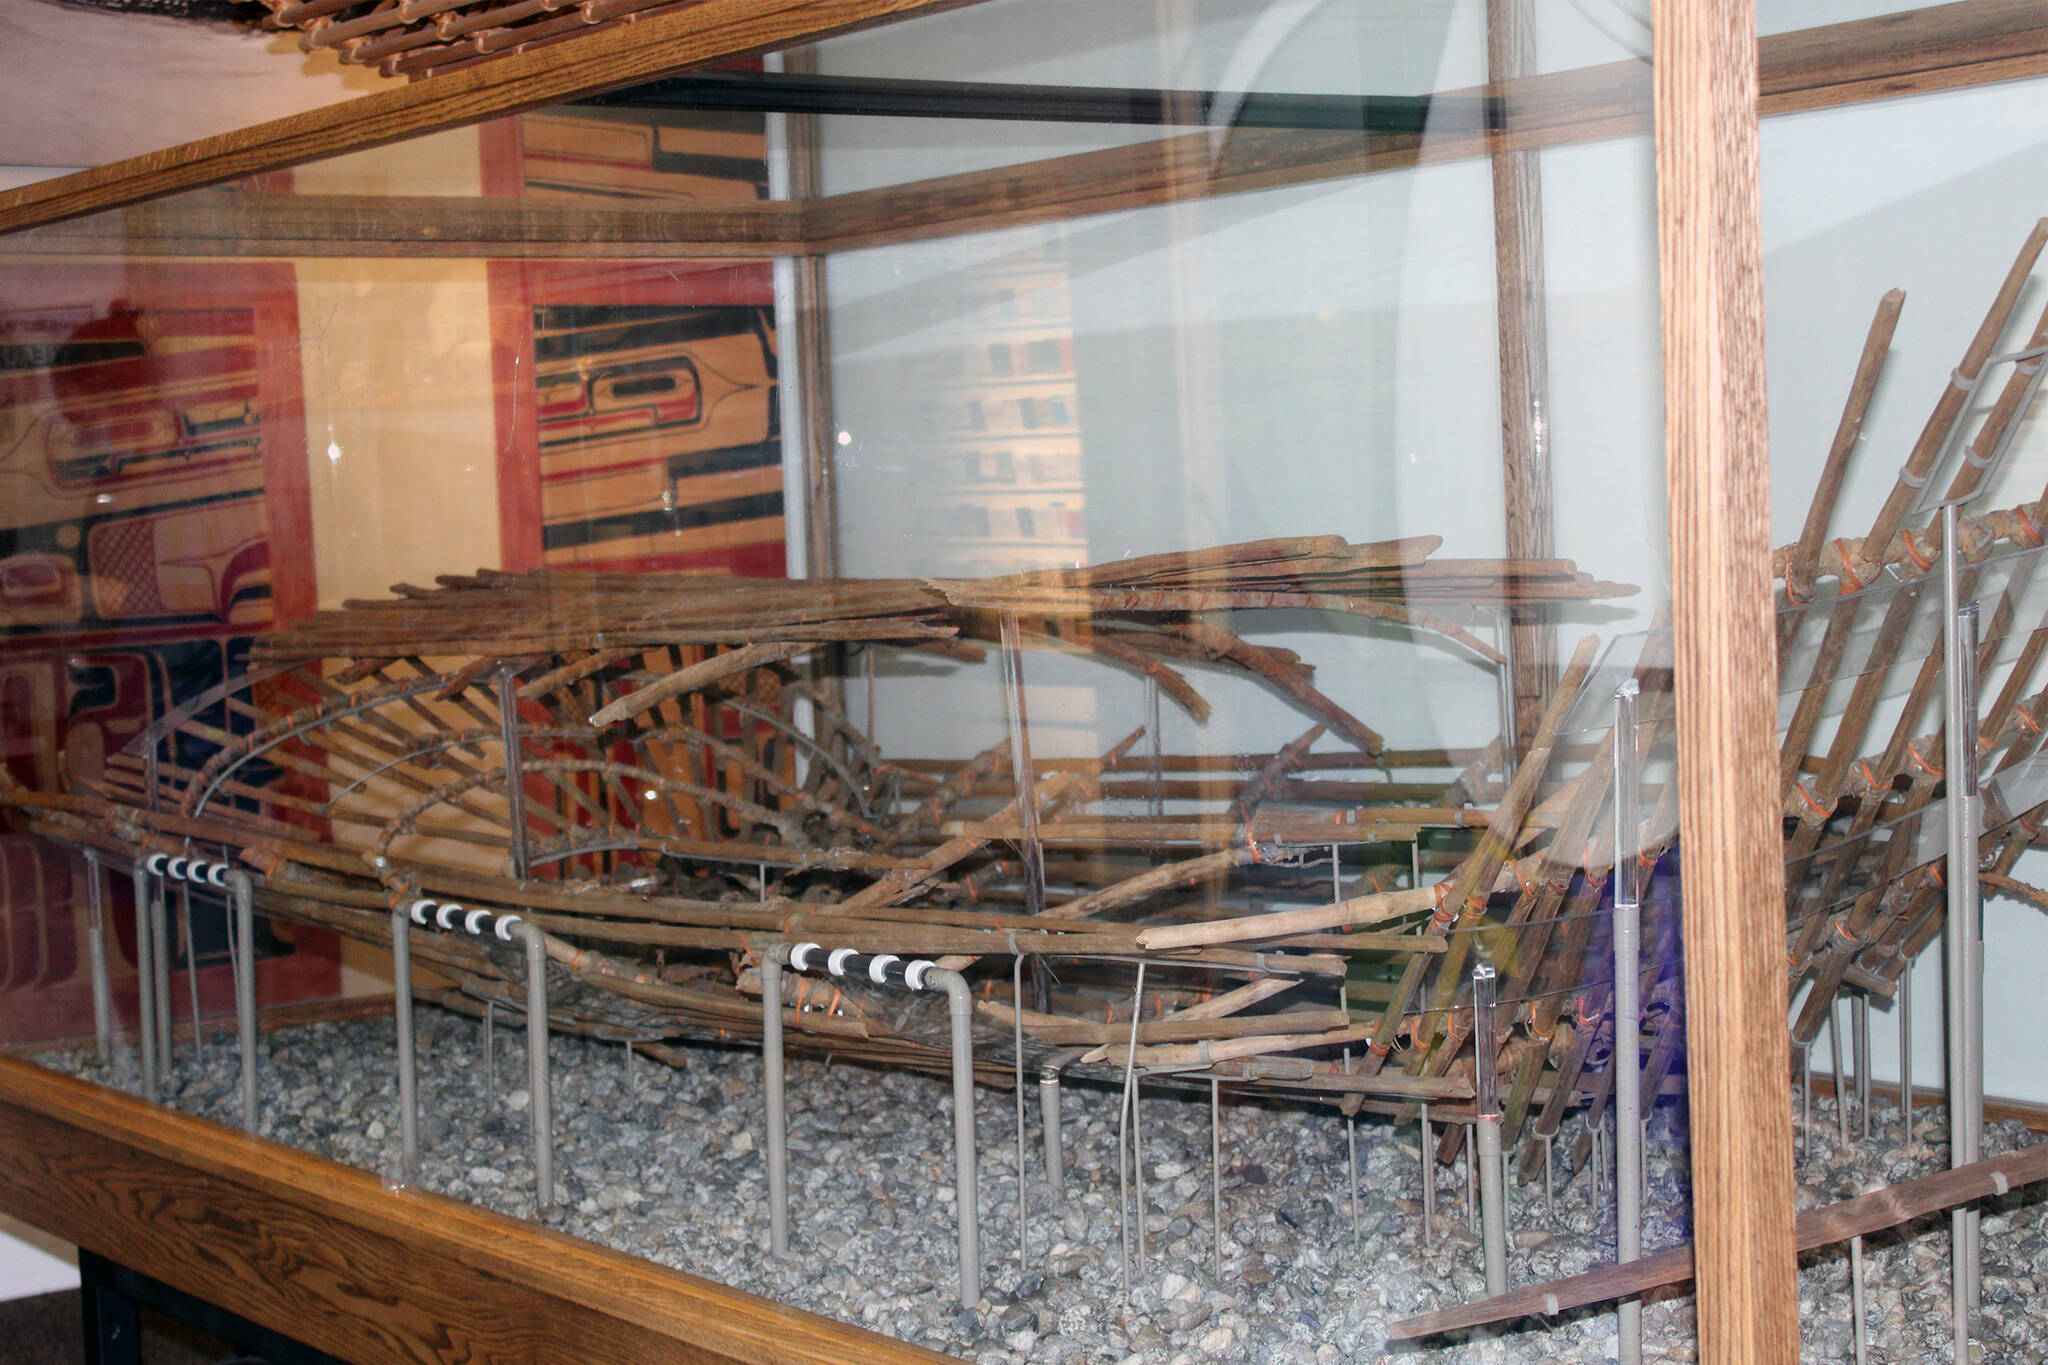 Located at the Juneau-Douglas City Museum, the Montana Creek Fish Trap is 500 to 700 years old. It was the first trap of its kind to be excavated on the Northwest Coast. (Dana Zigmund/Juneau Empire)